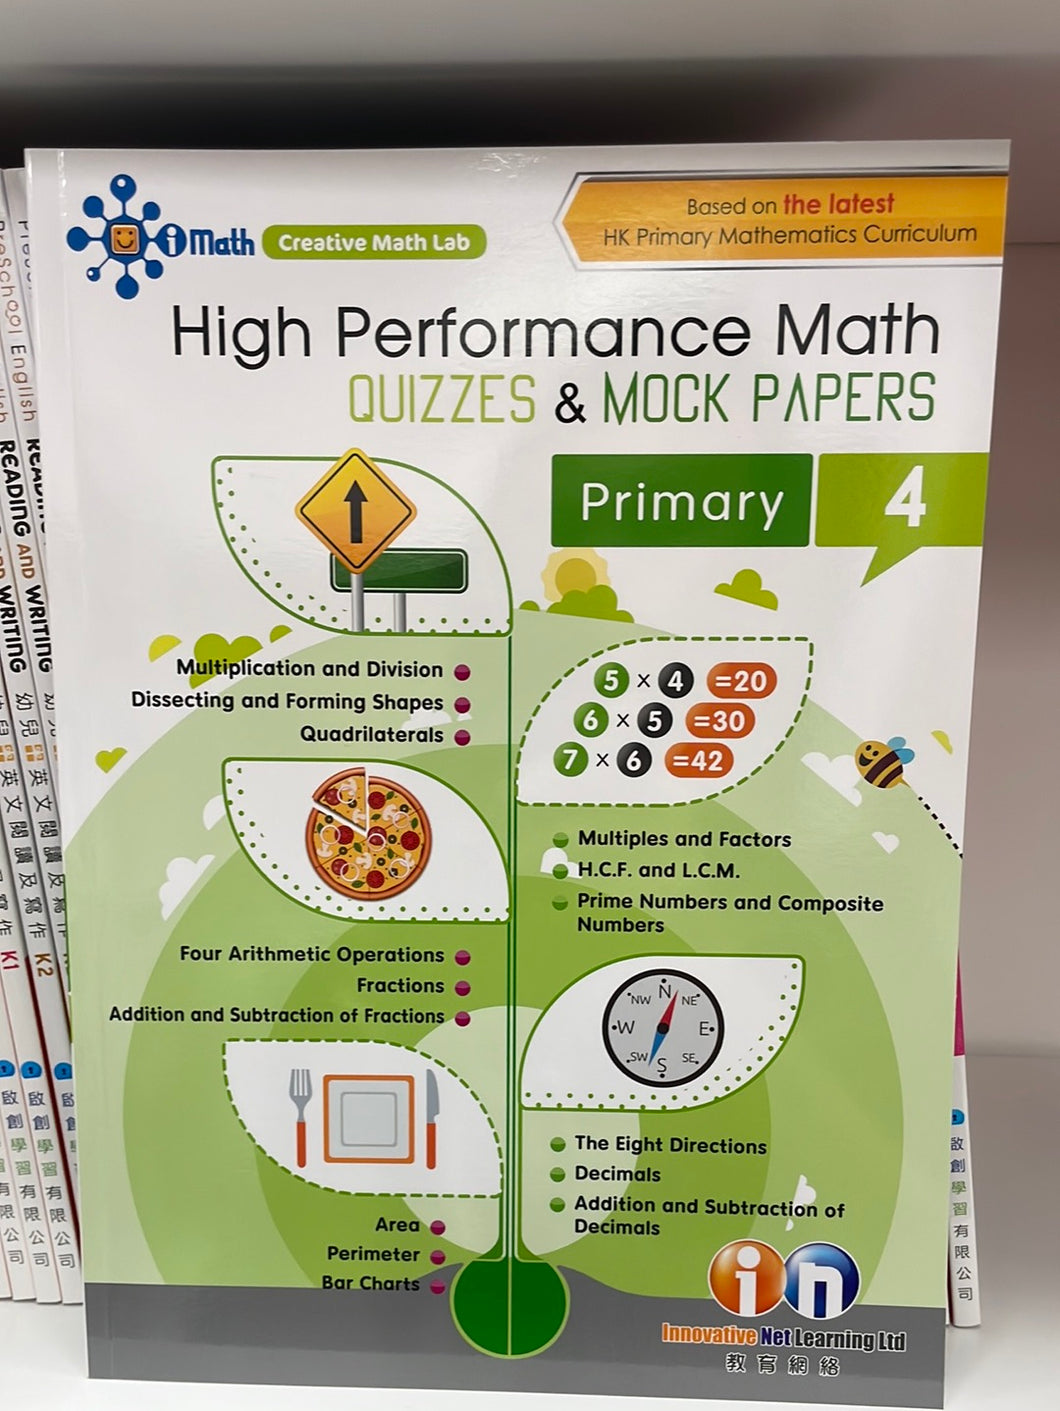 KL High Performance Math Quizzes & Mock Papers P4